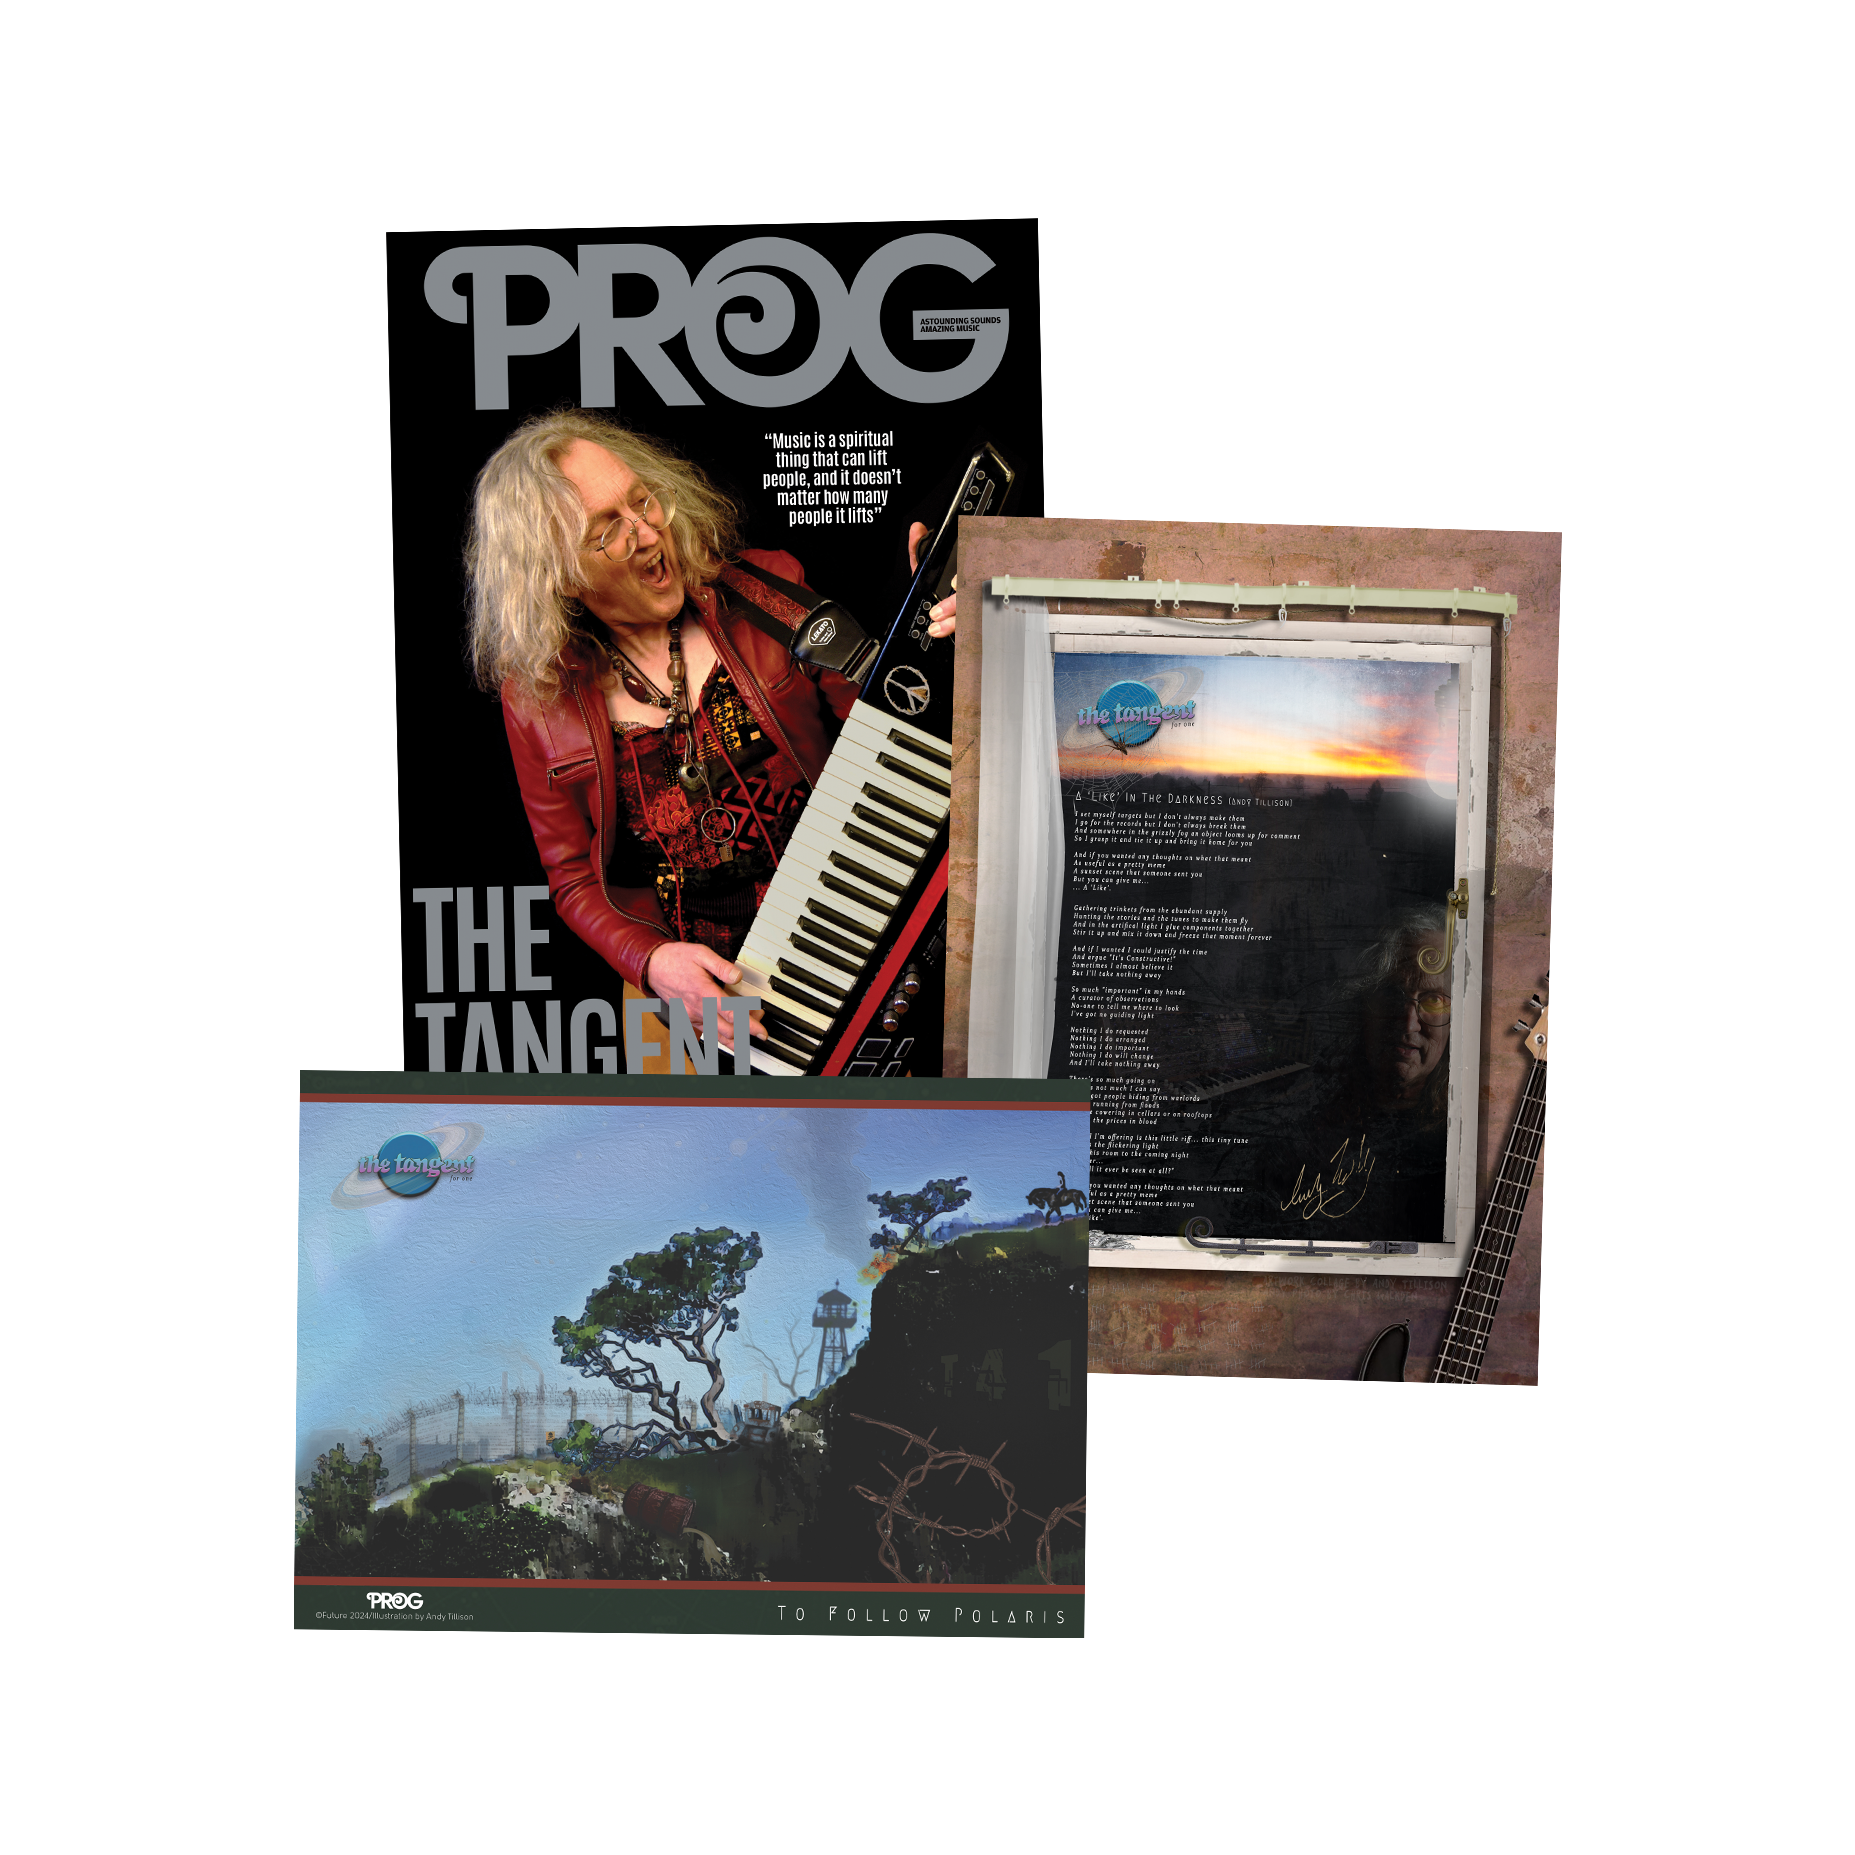 Prog Issue 150 - The Tangent Magazine + Exclusive Signed Lyrics Sheet + A4 Art Card